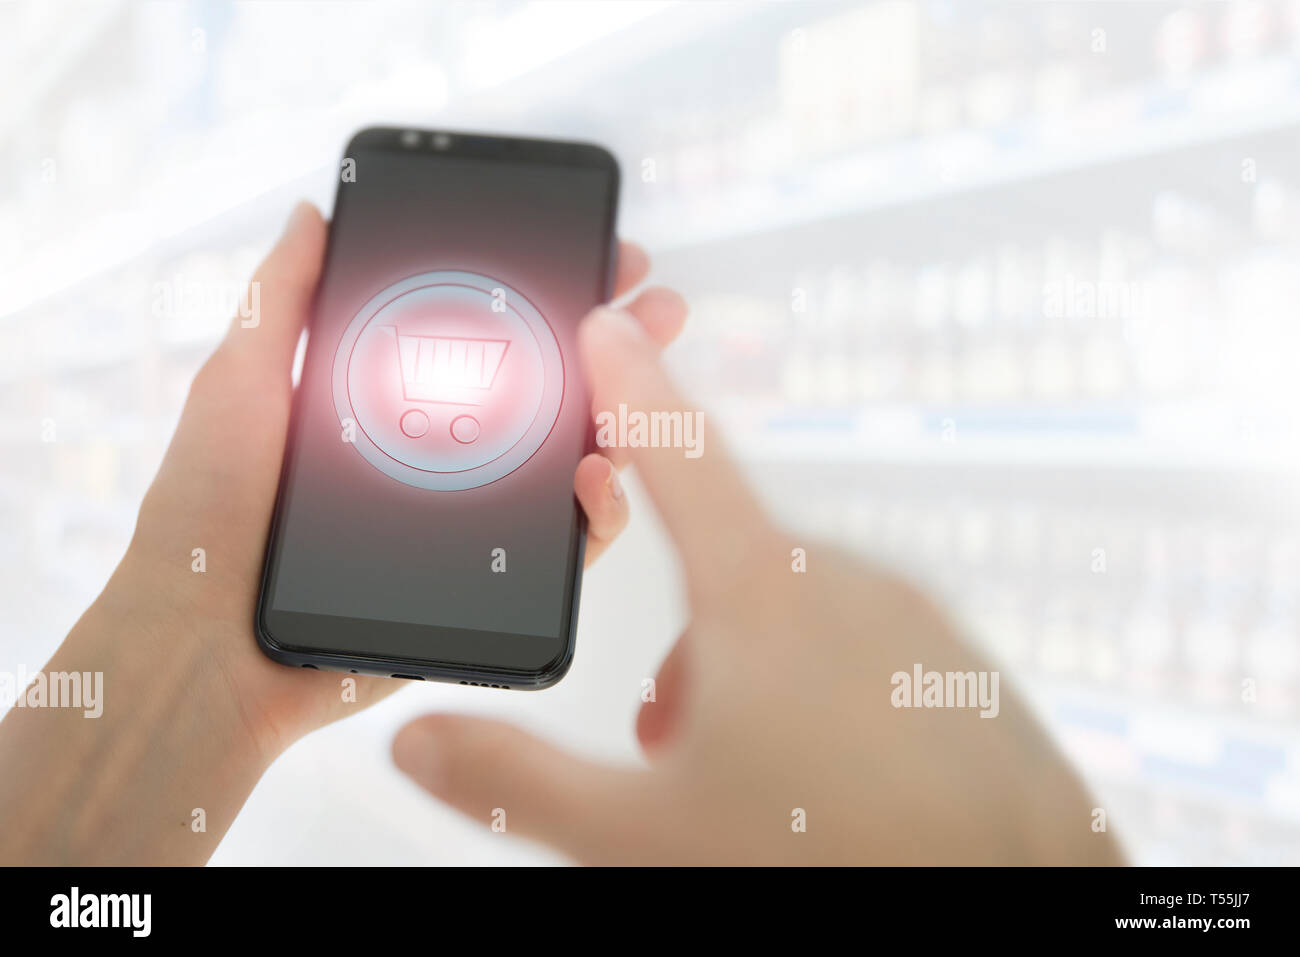 Shopping basket on a mobile phone screen. Woman Hand holding mobile phone on Supermarket blur background Stock Photo